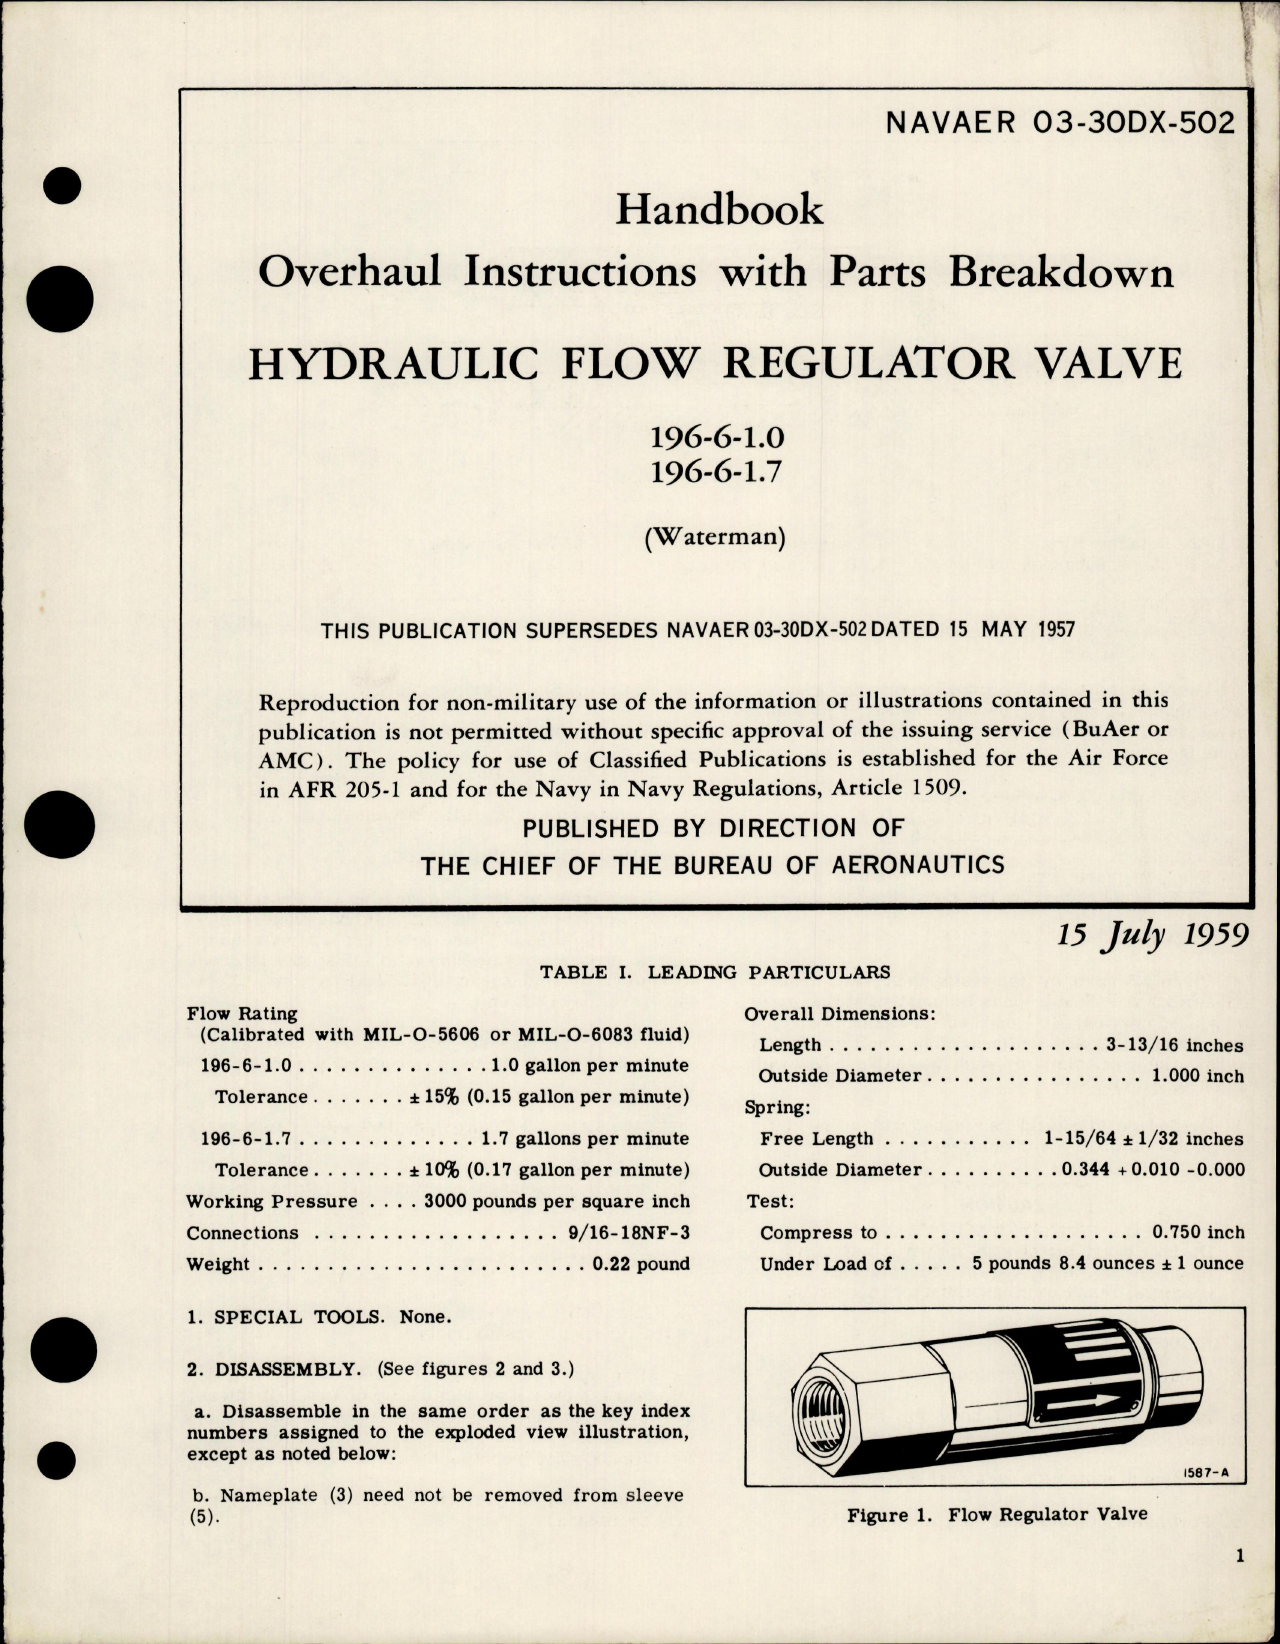 Sample page 1 from AirCorps Library document: Overhaul Instructions with Parts Breakdown for Hydraulic Flow Regulator Valve - 196-6-1.0 and 196-6-1.7 